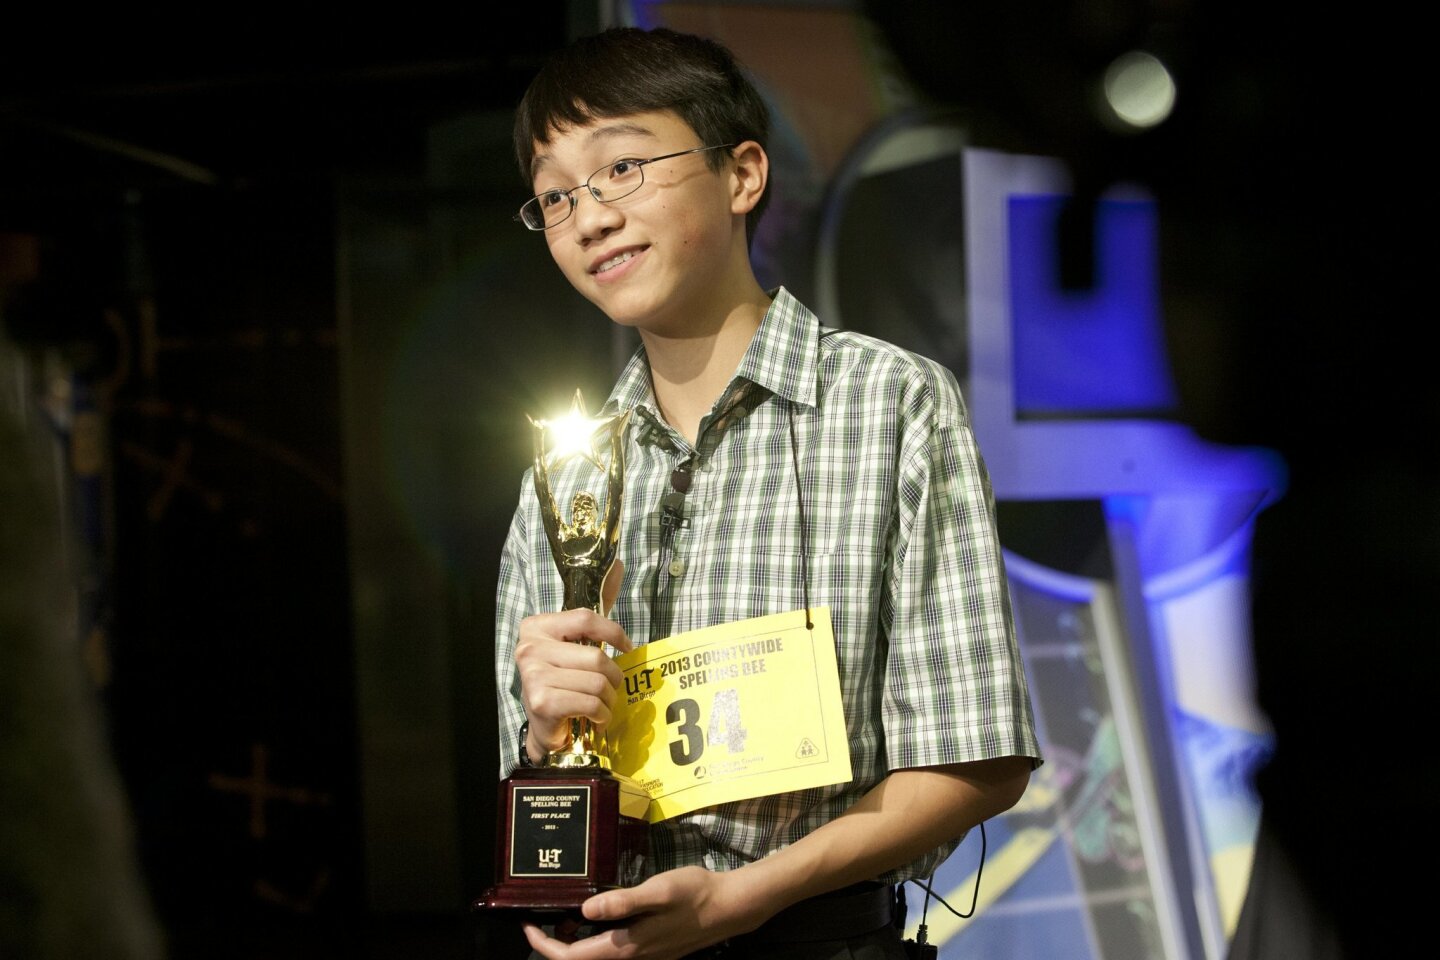 The spelling bee winner, Giabao Tonthat